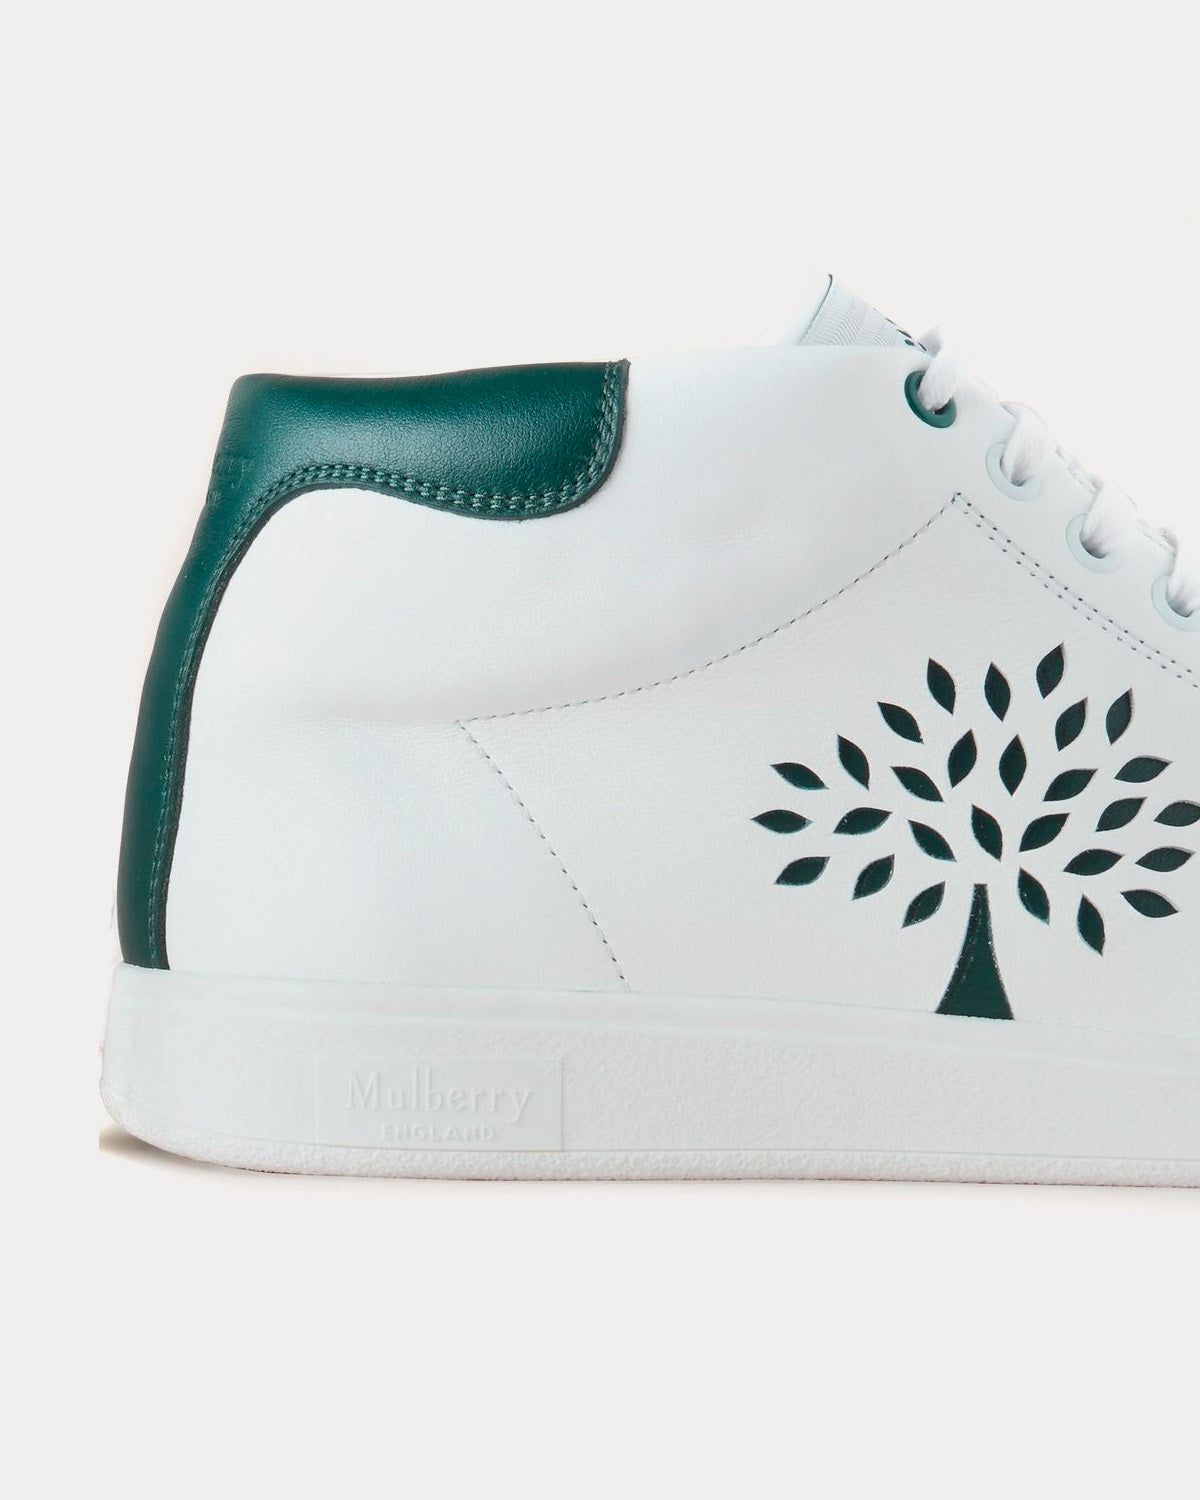 Mulberry - Tree Tennis Leather Mulberry Green High Top Sneakers